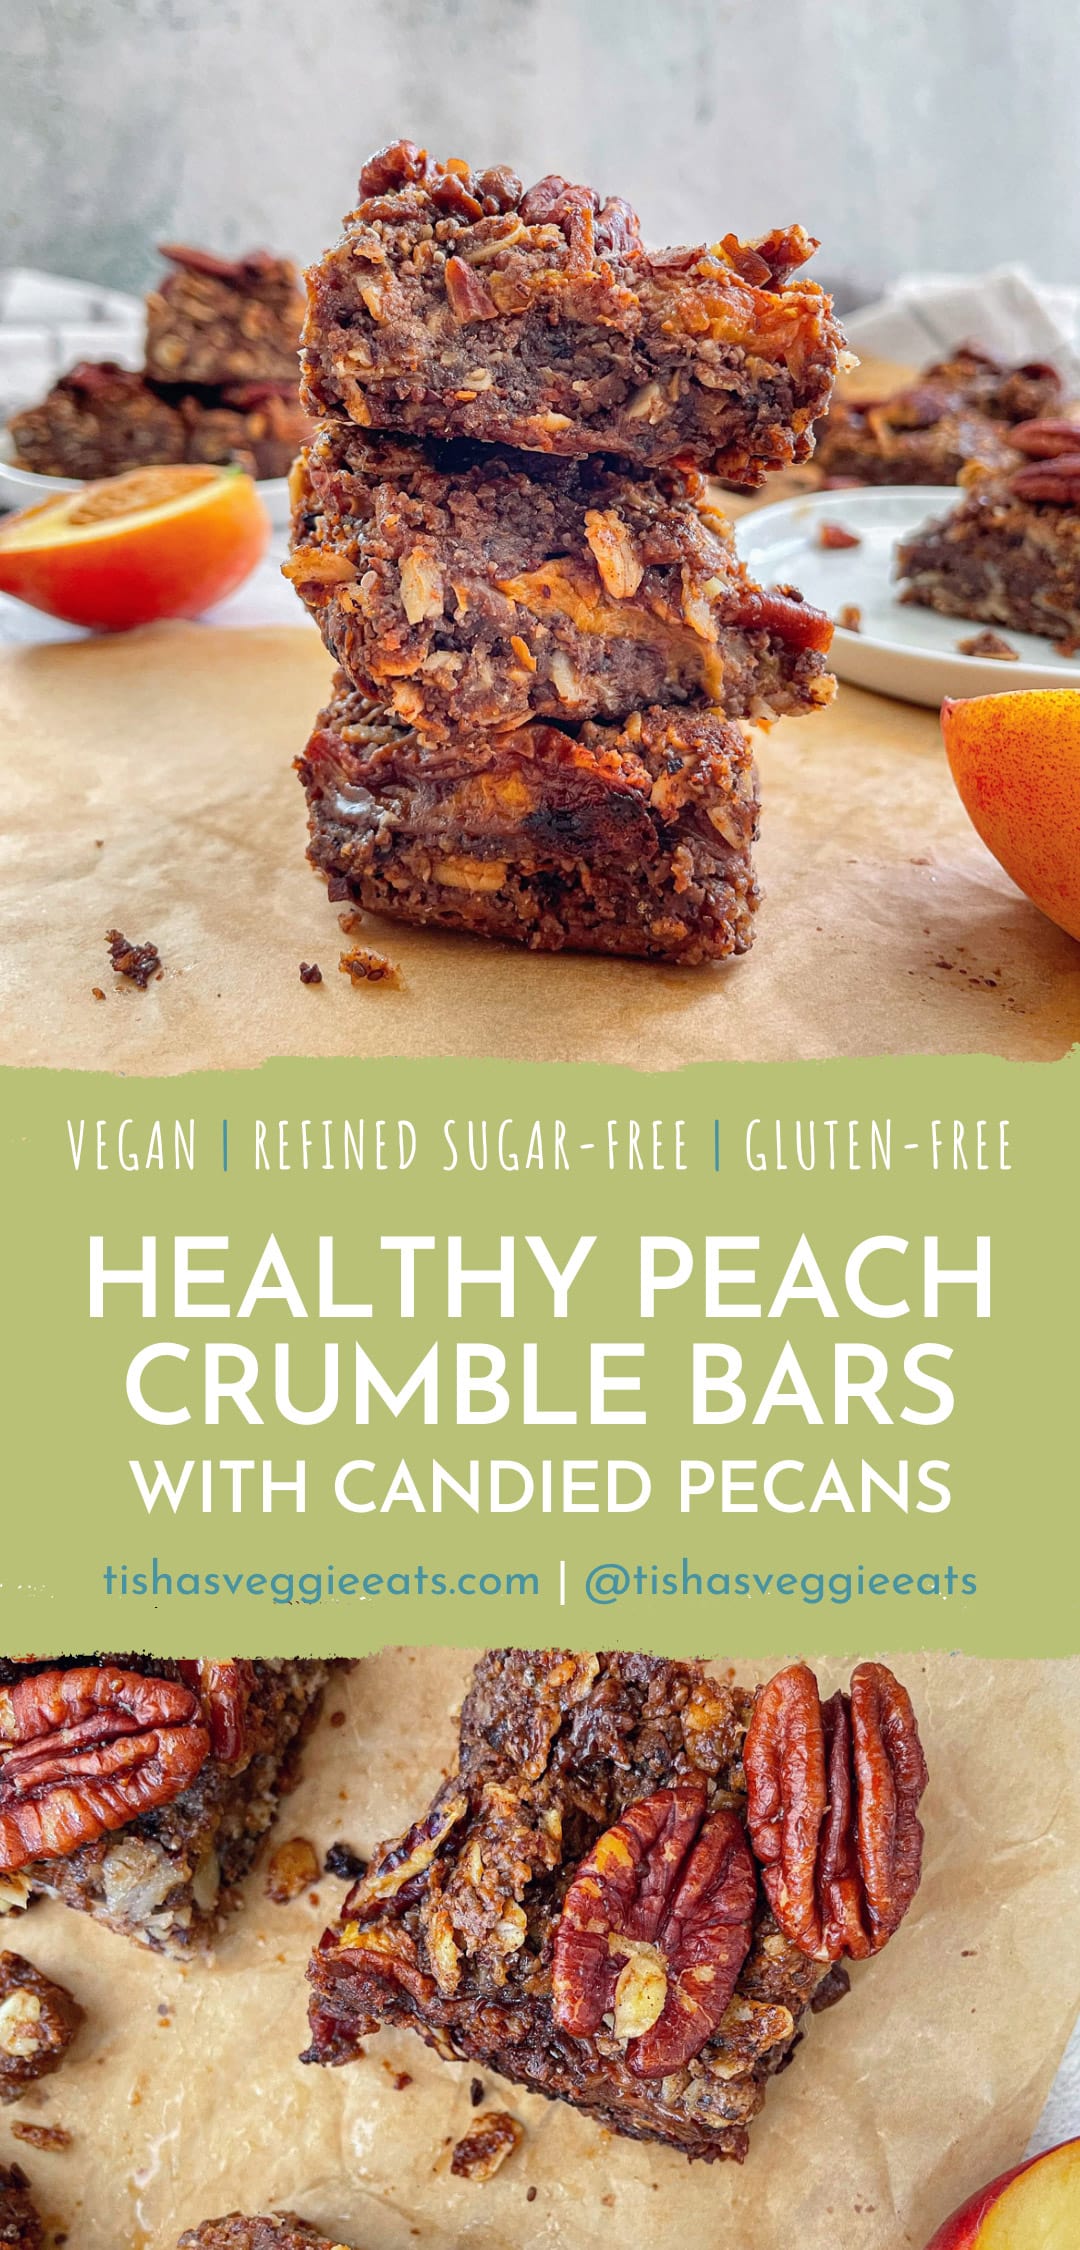 3 Vegan Peach Crumble Bars with Candied Pecans stacked with other bars blurred in the background pinterest image